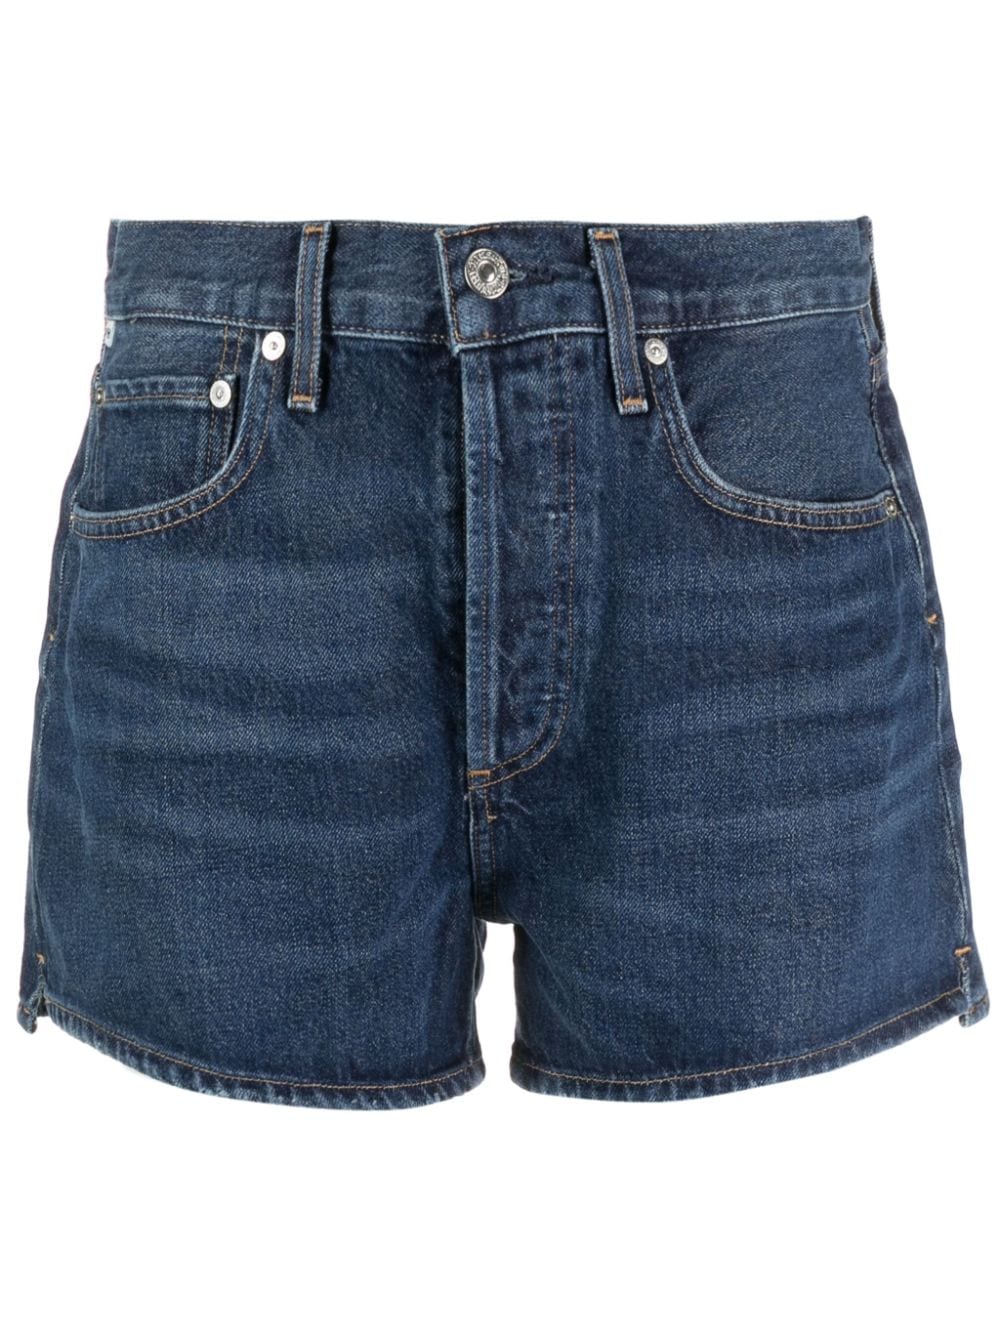 Citizens Of Humanity Marlow Denim Mini Shorts In Blue